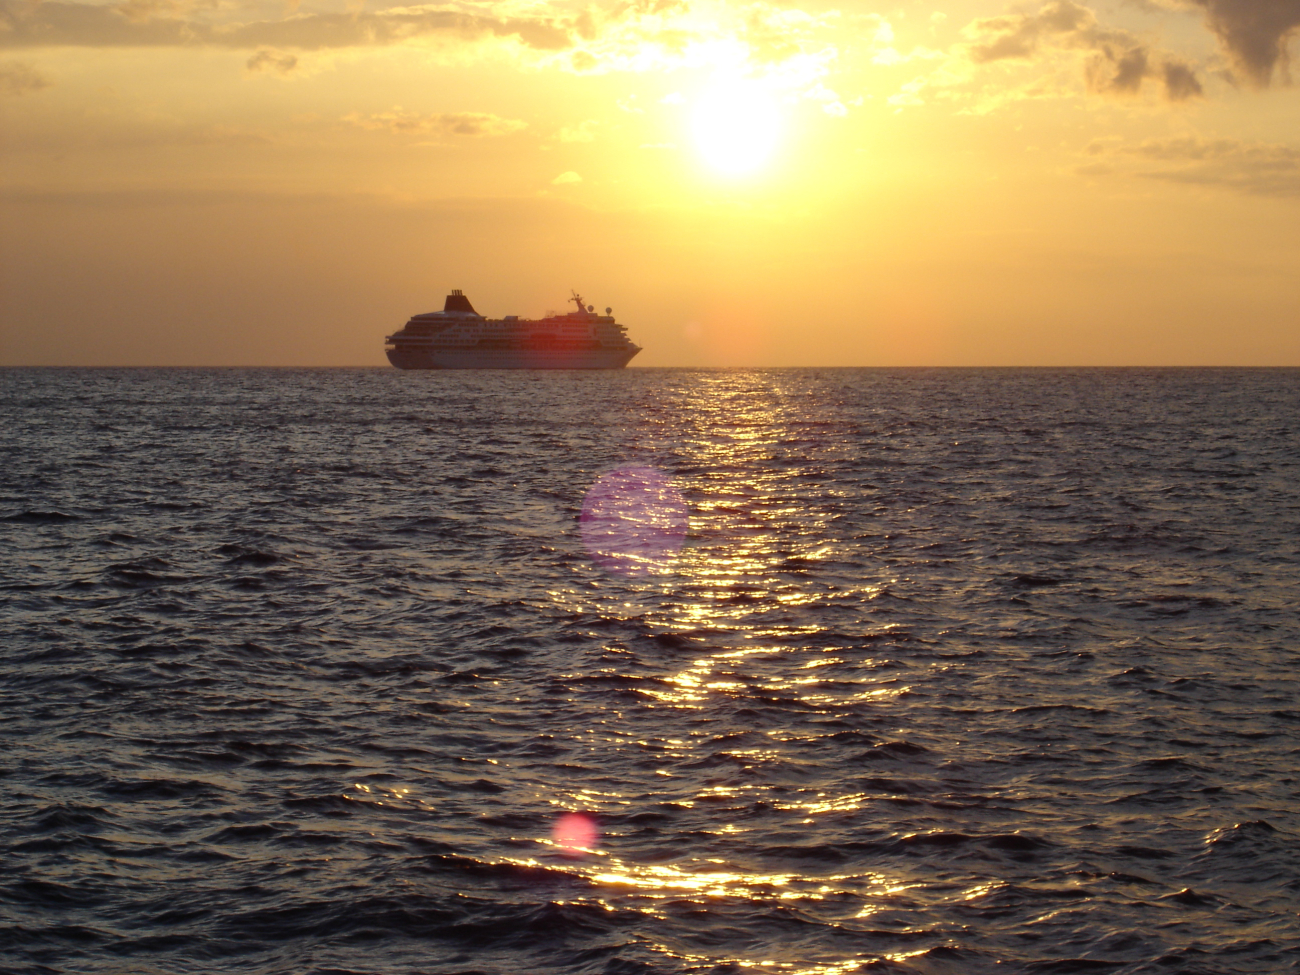 A cruise ship sailing into the sunset